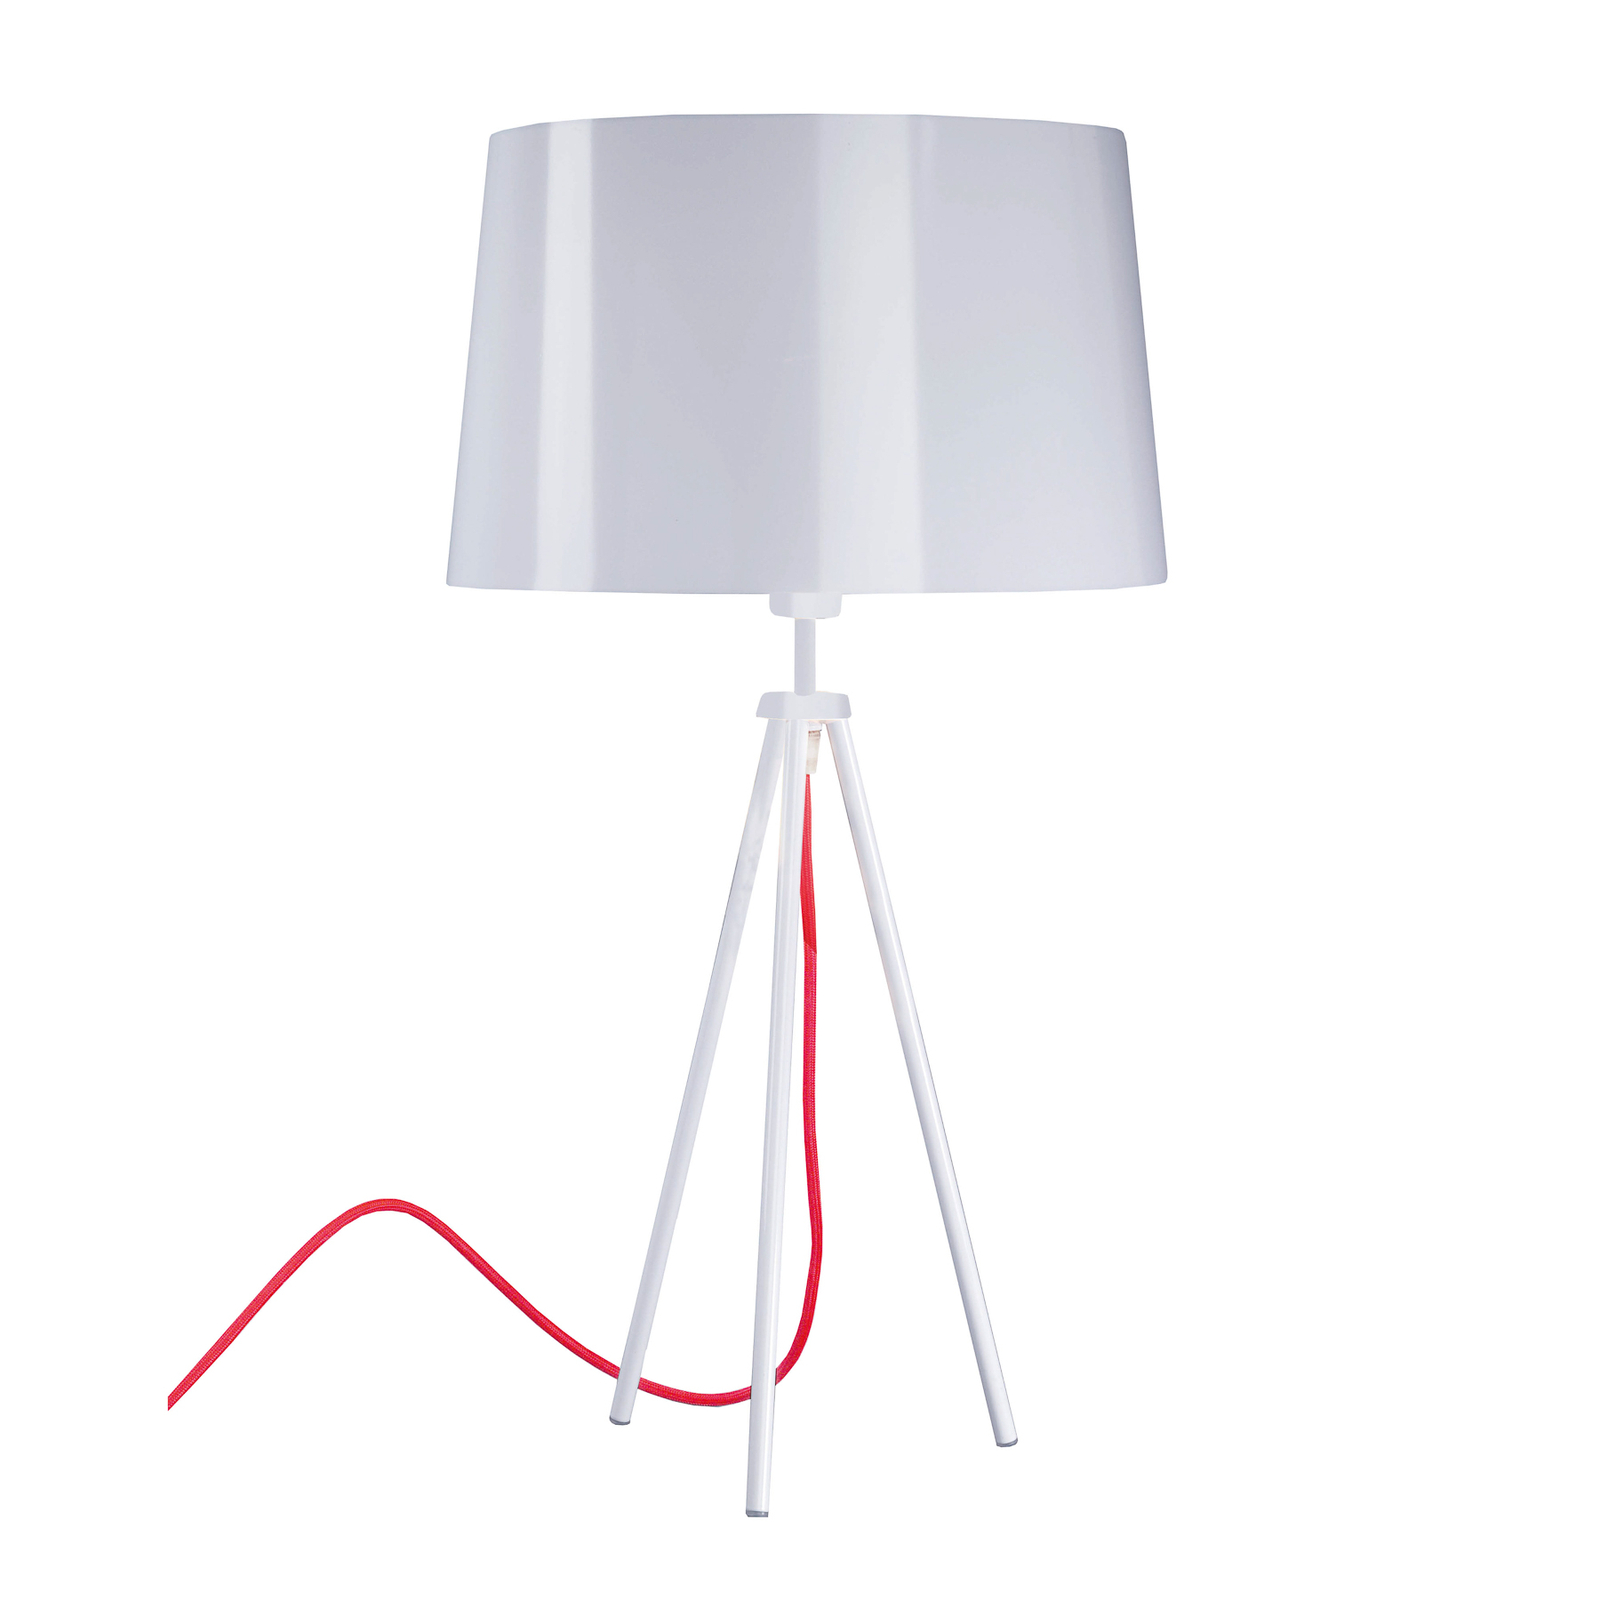 Aluminor Tropic table lamp white, red cable